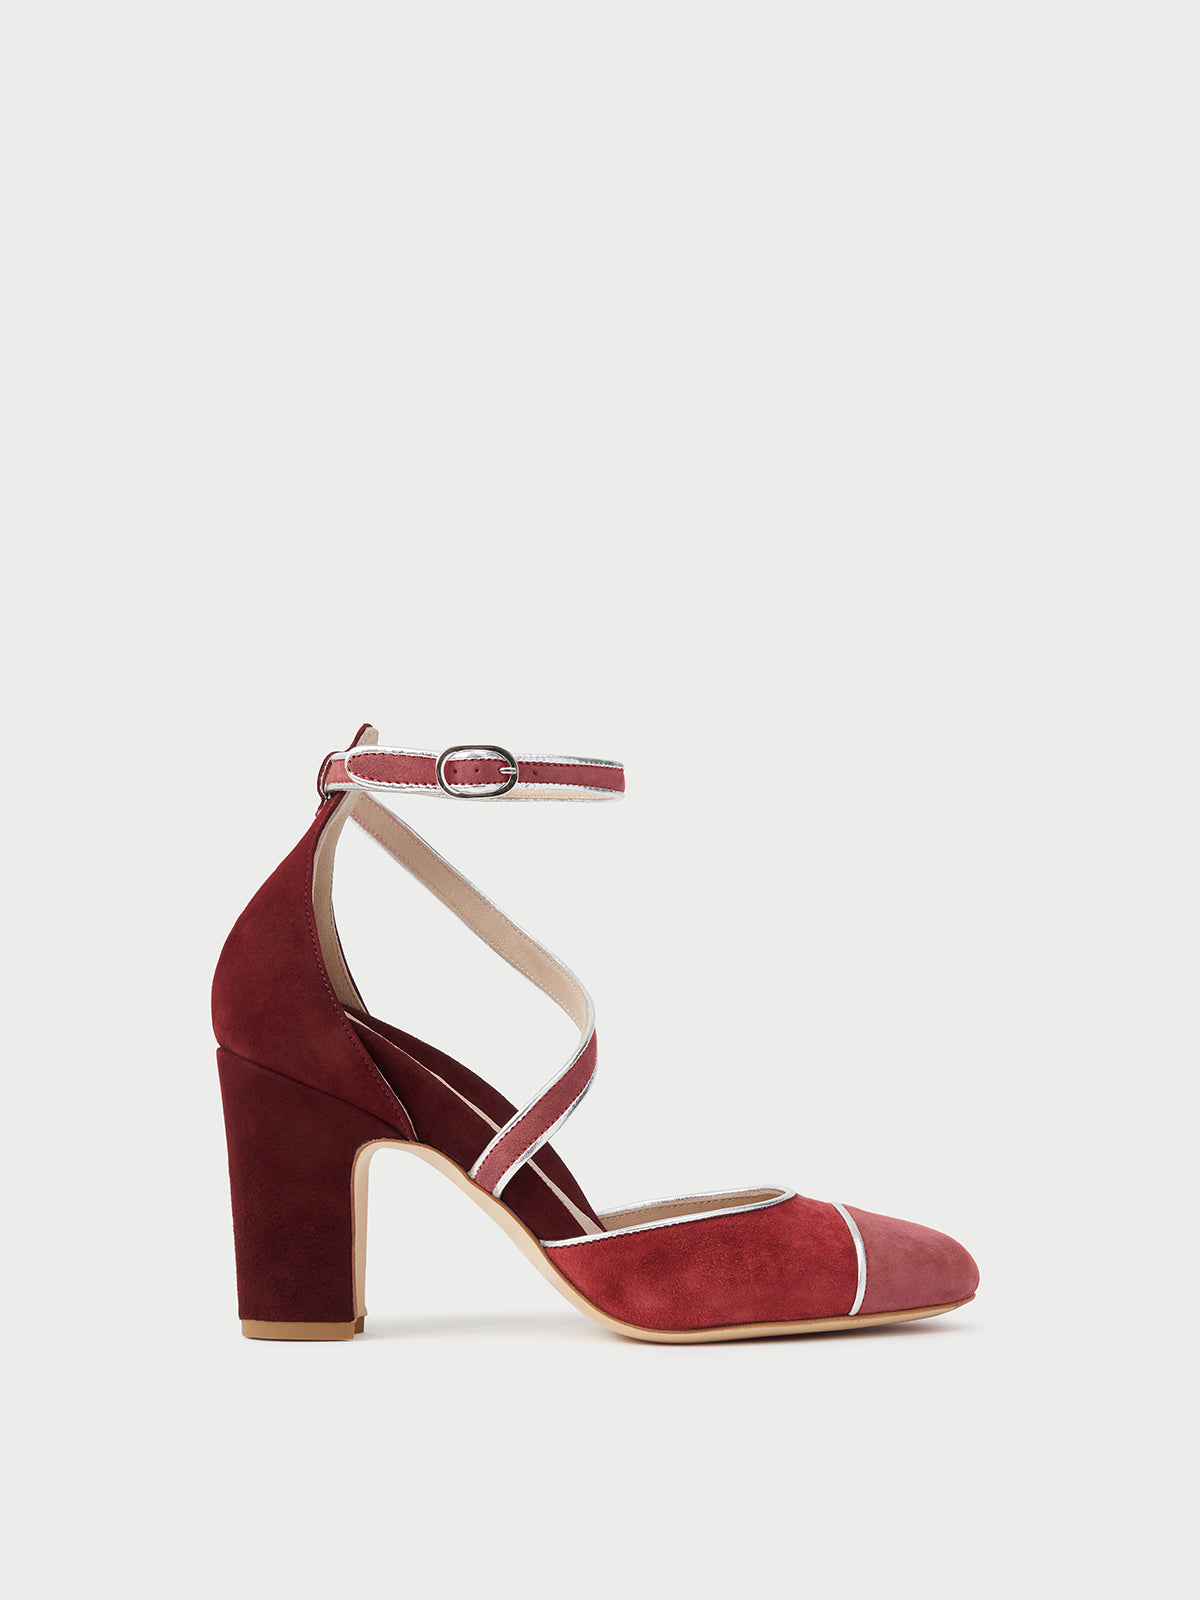 Mavette Pump Nola D'Orsay suede burgundy pumps made in Italy